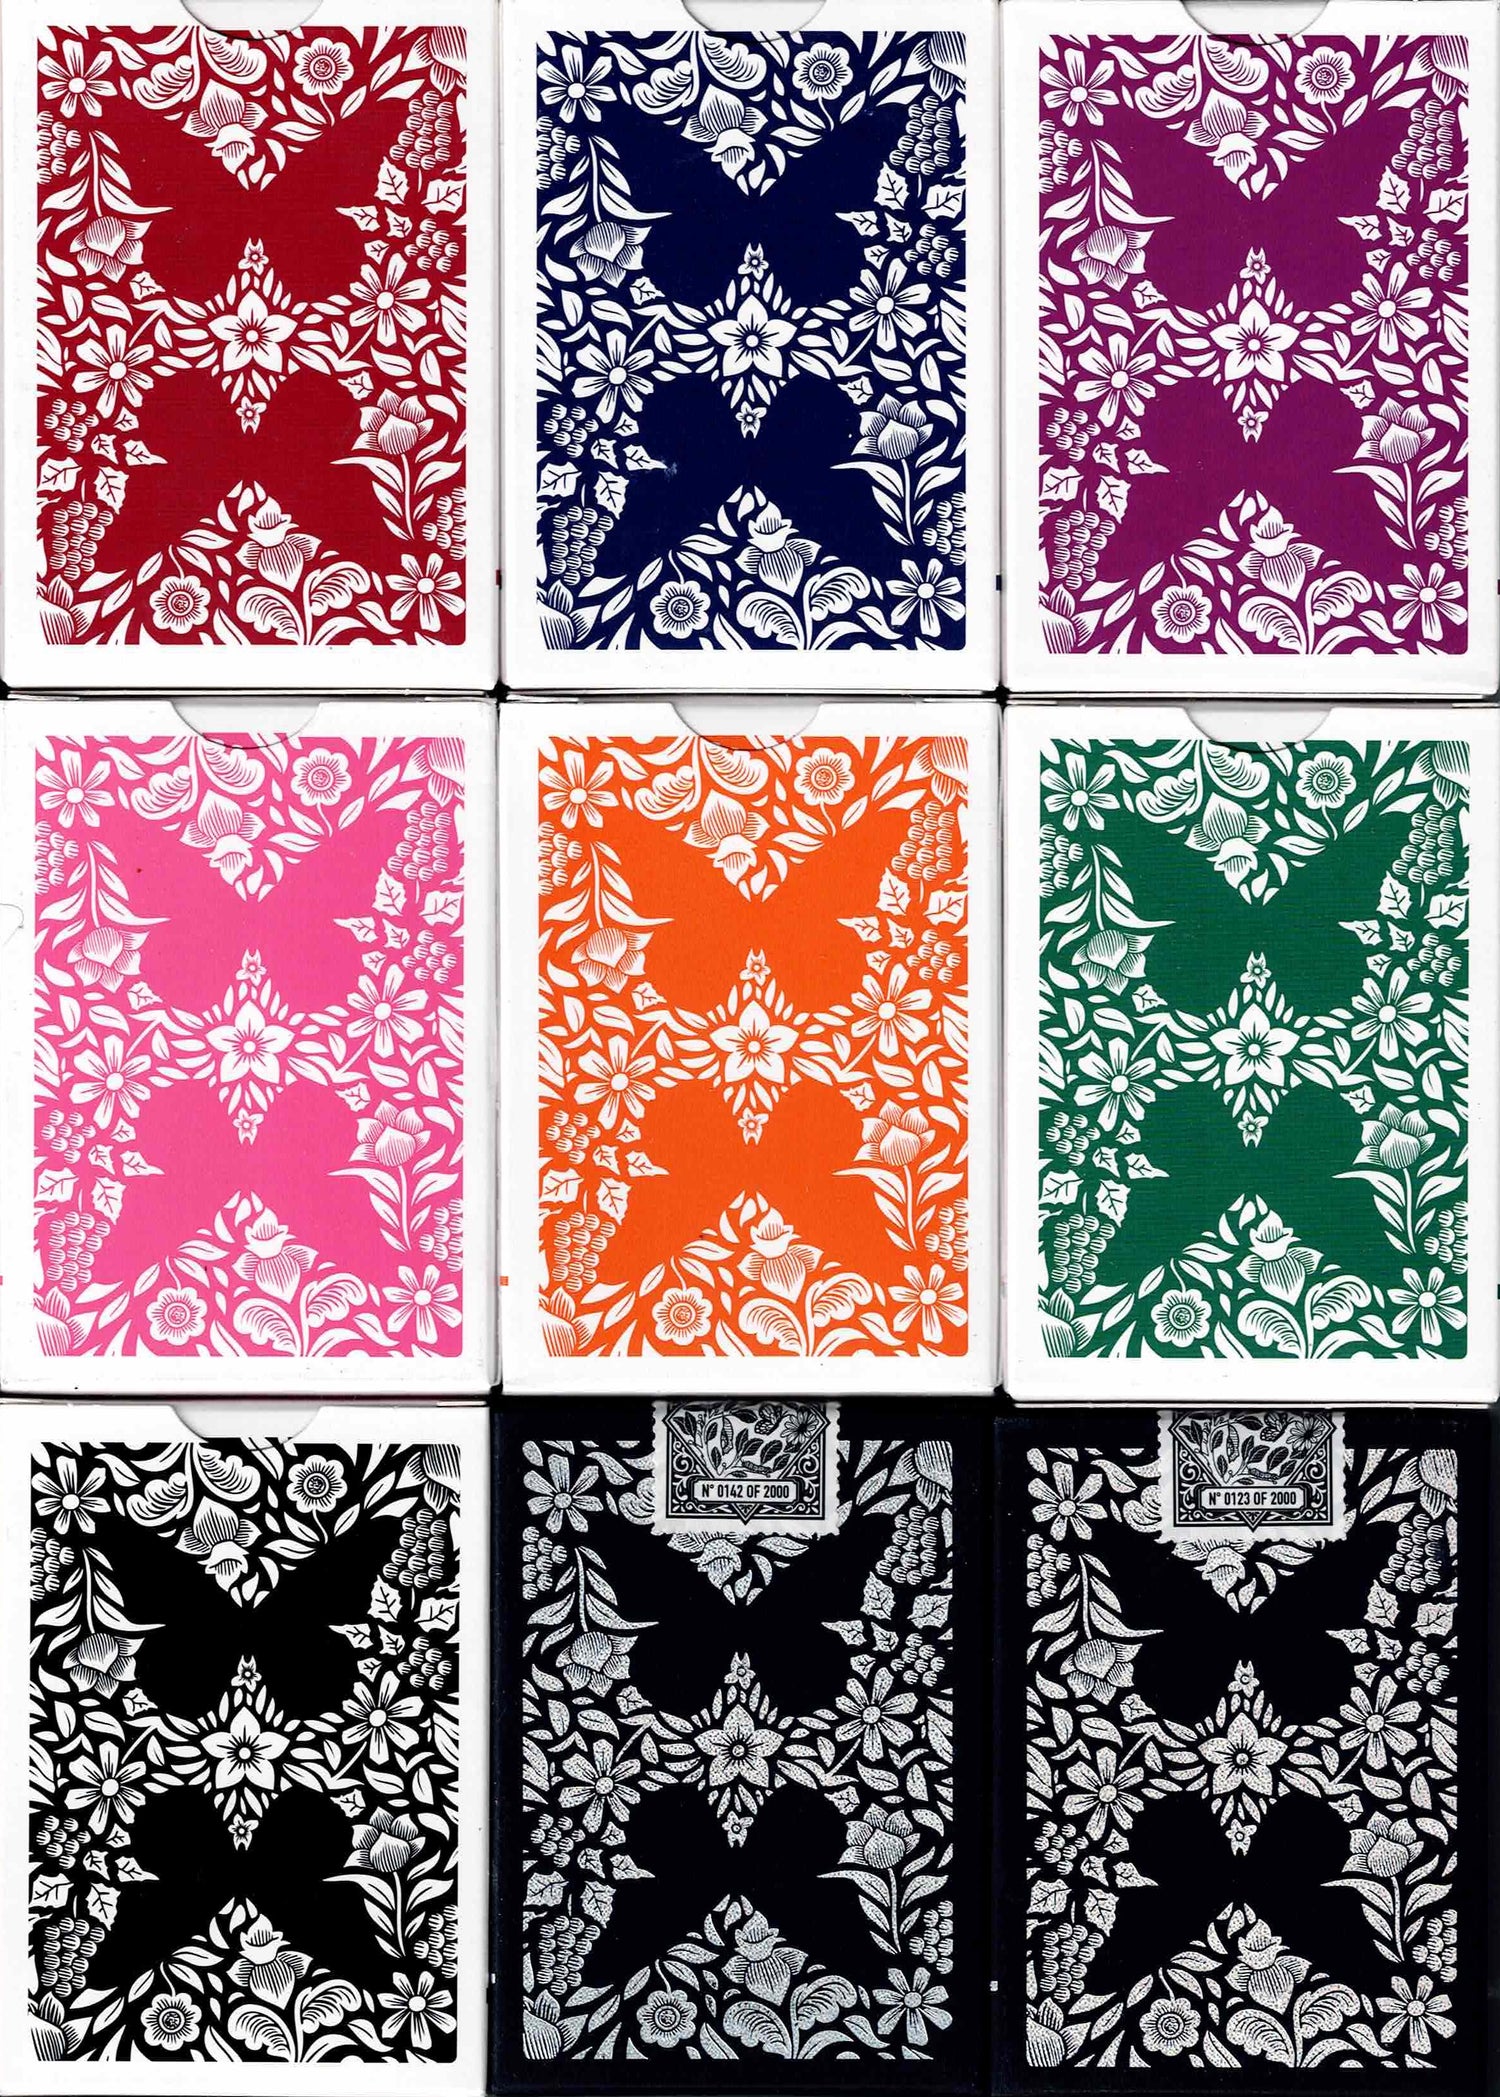 Signed Butterfly Workers Edition Playing Cards by Ondrej Psenicka